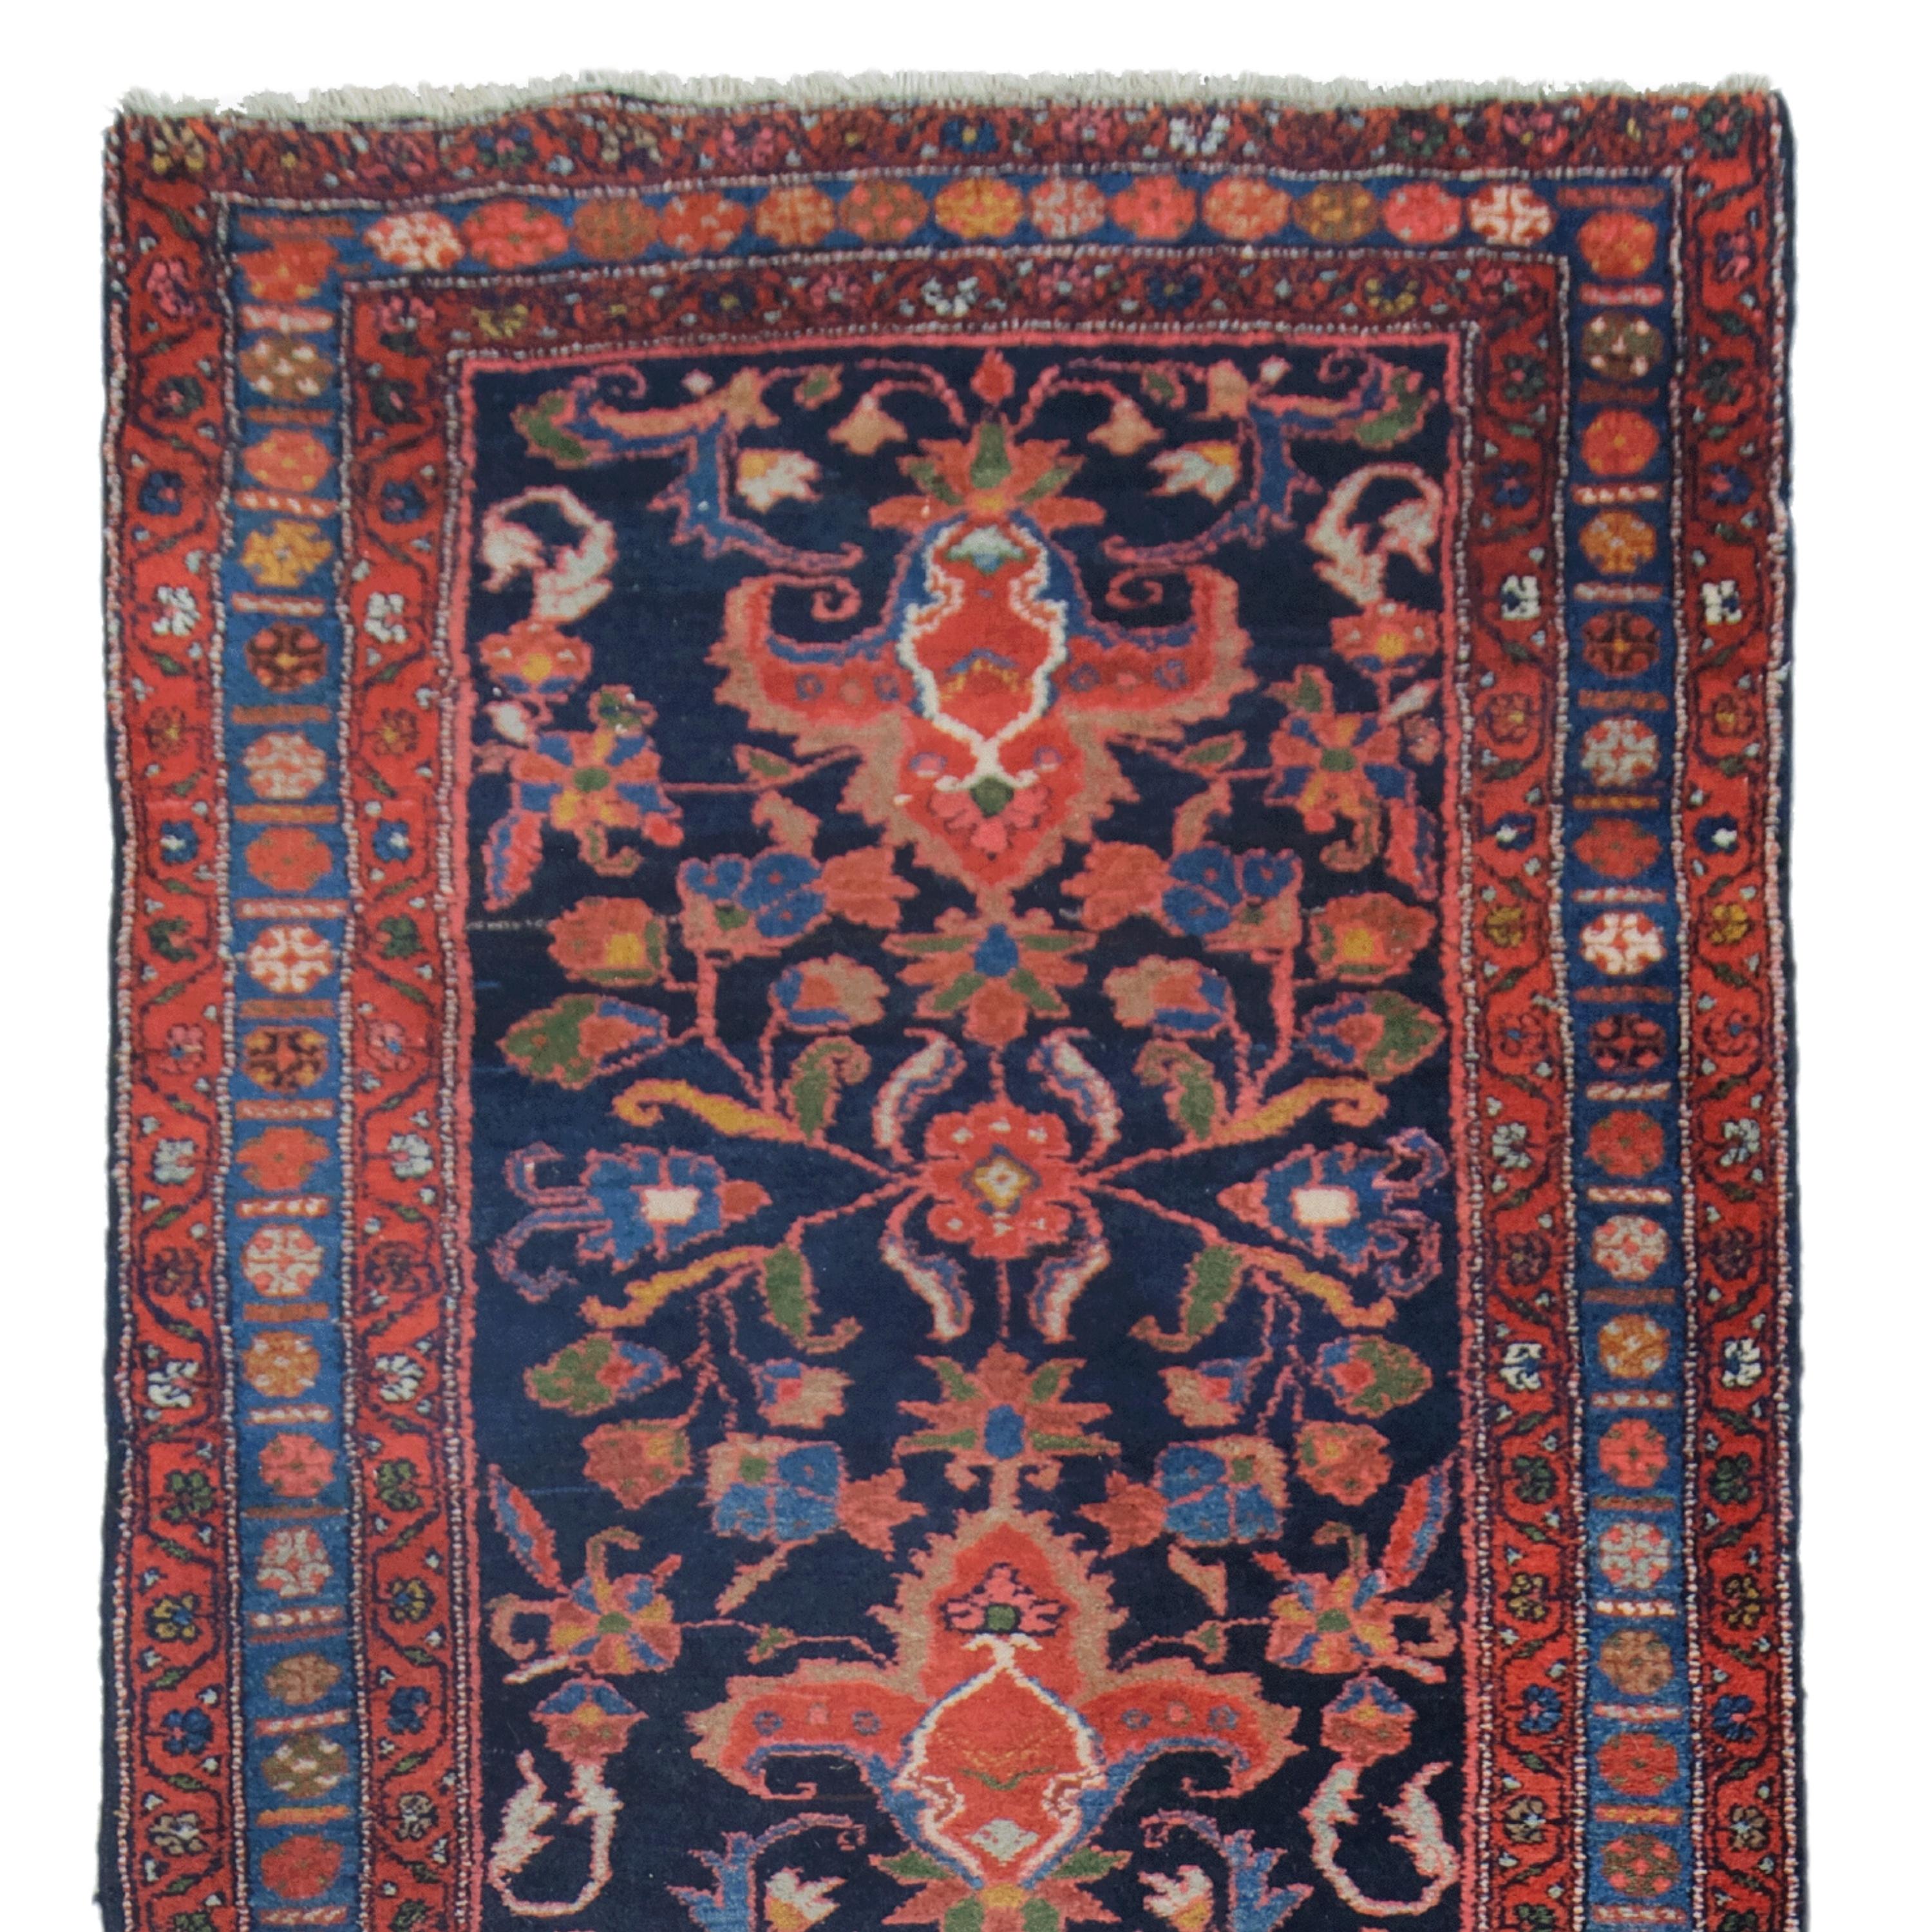 19th Century Karadja Runner

This magnificent 19th-century antique Karadja rug is a masterpiece that weaves the history, art and culture of its time into its intricate patterns. Each stitch tells a story, with skilled craftsmen meticulously crafting